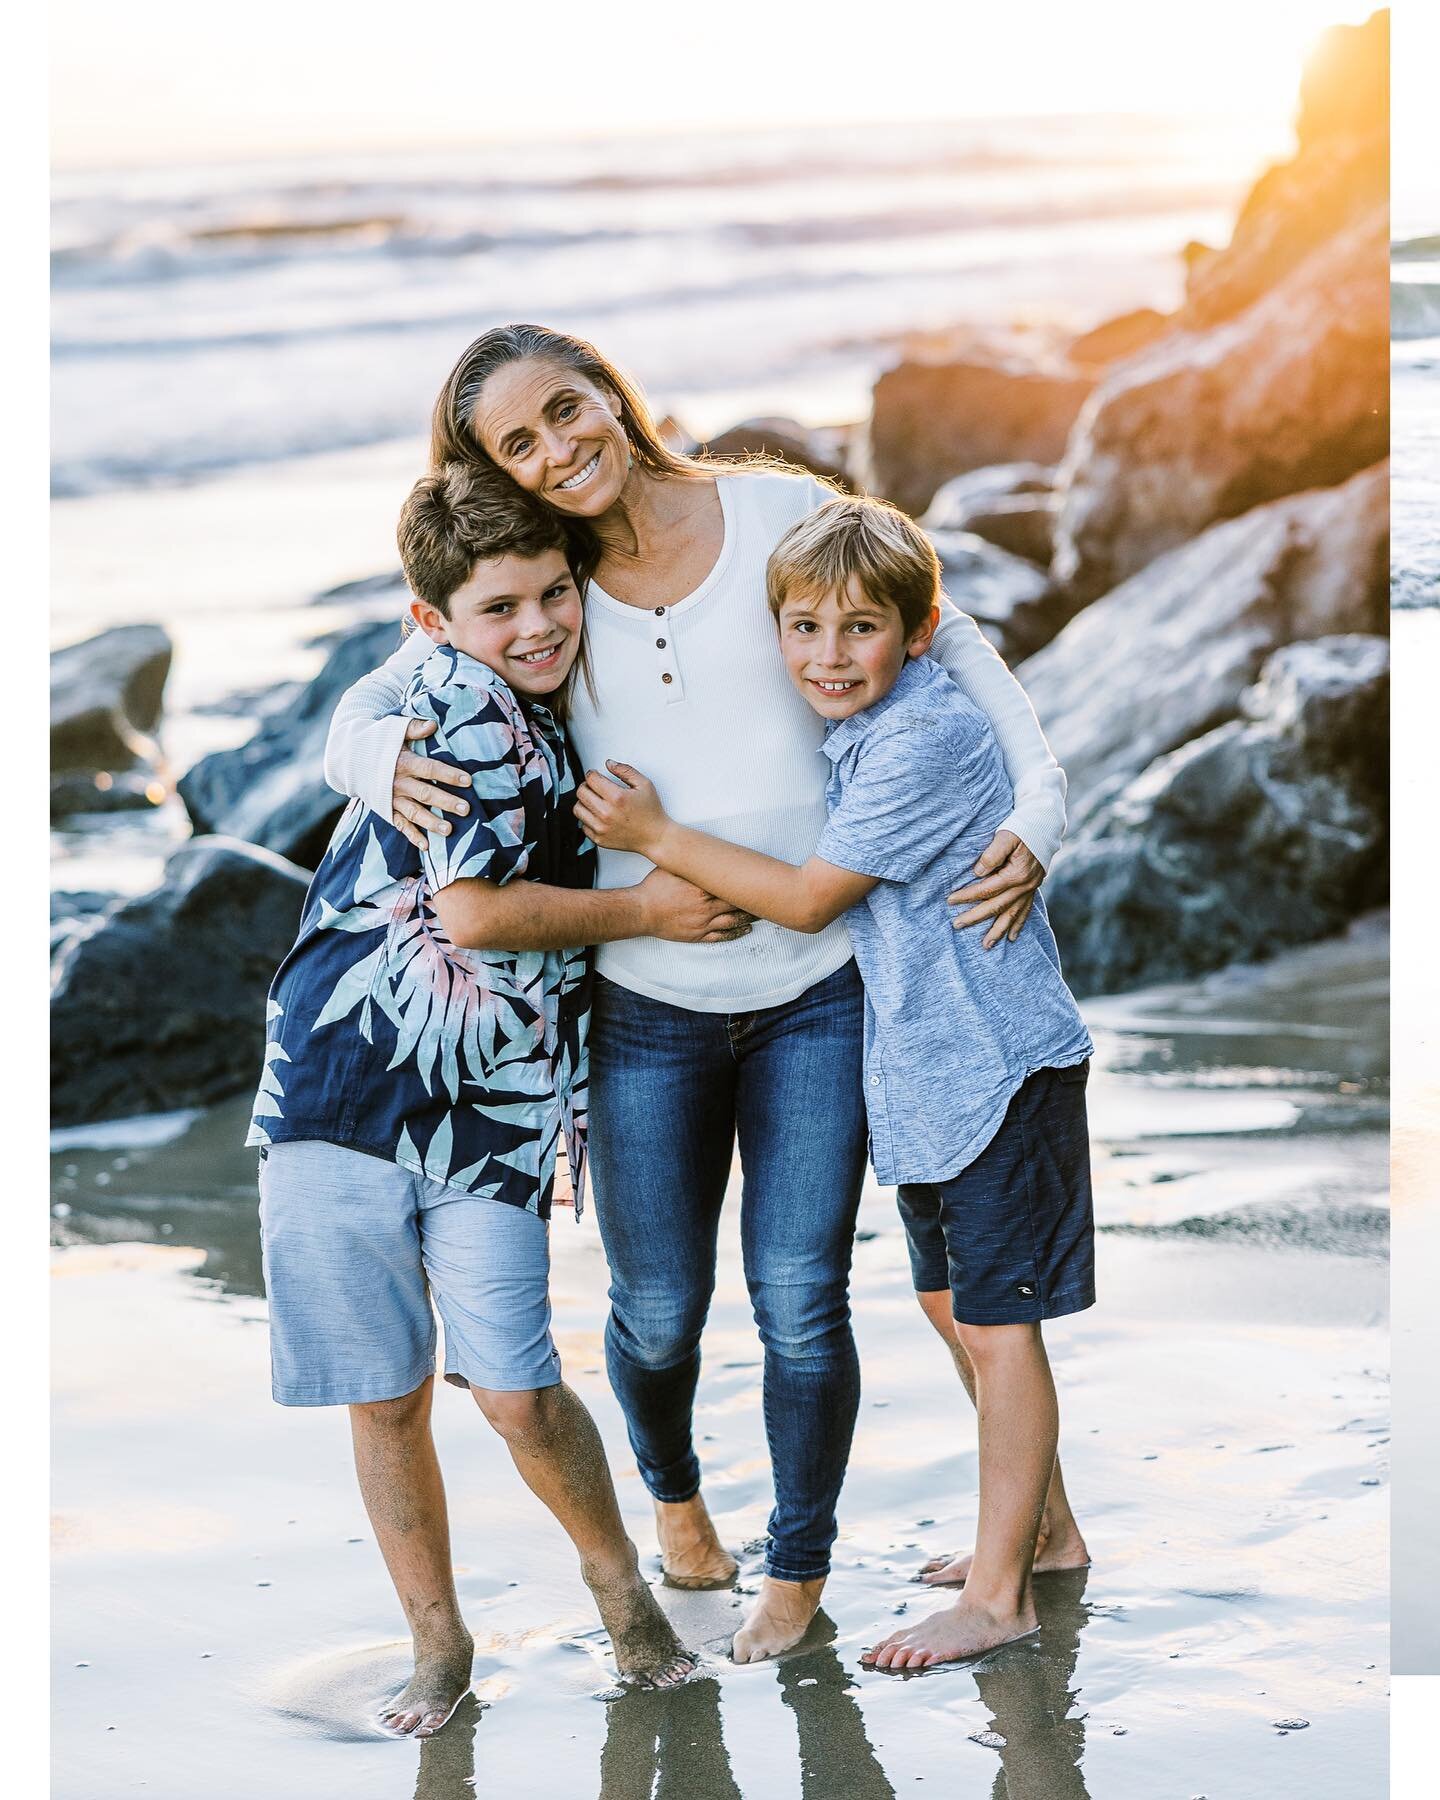 Loved this shoot with the Costello Family. Alison, Levi and Wyatt were so fun. This shoot was so easy and enjoyable, probably because you could see how much they loved each other and liked being together. They had fun and shared some special moments 